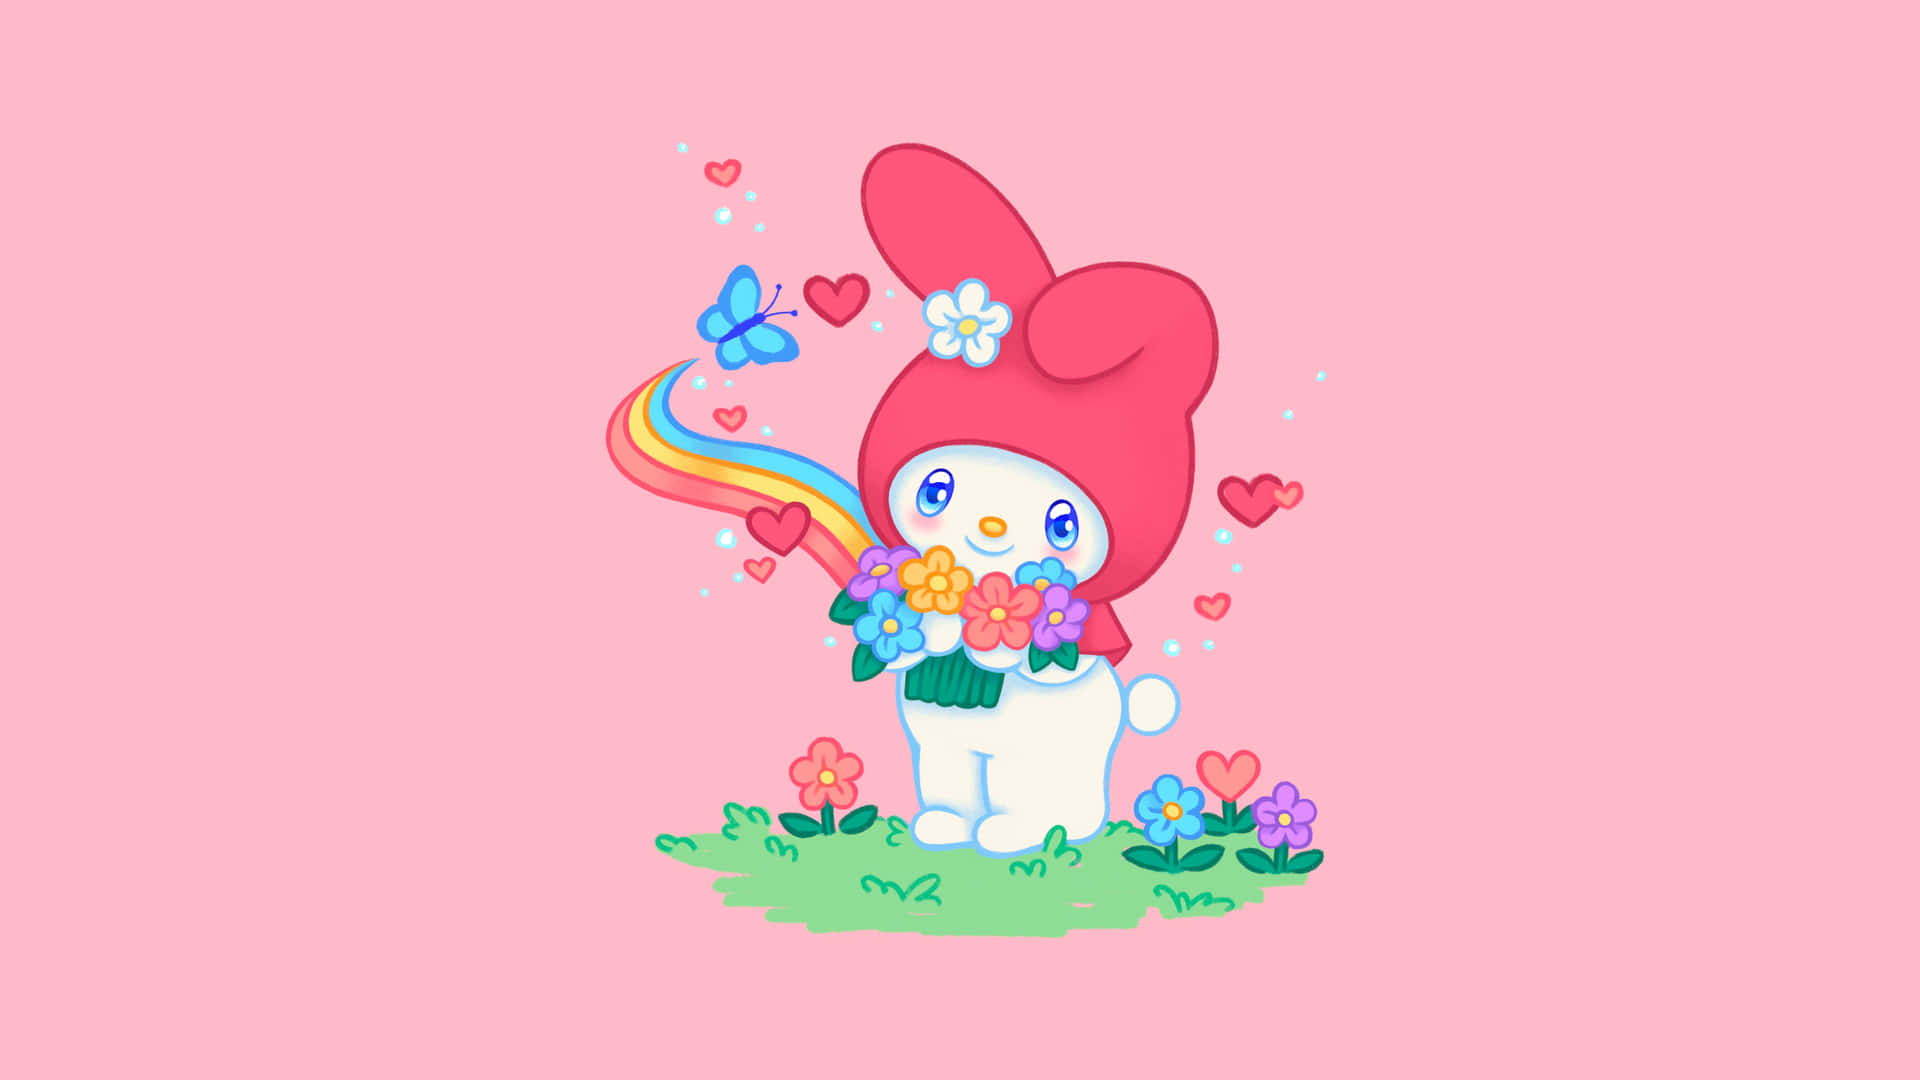 My Melody Pink Aesthetic Wallpaper